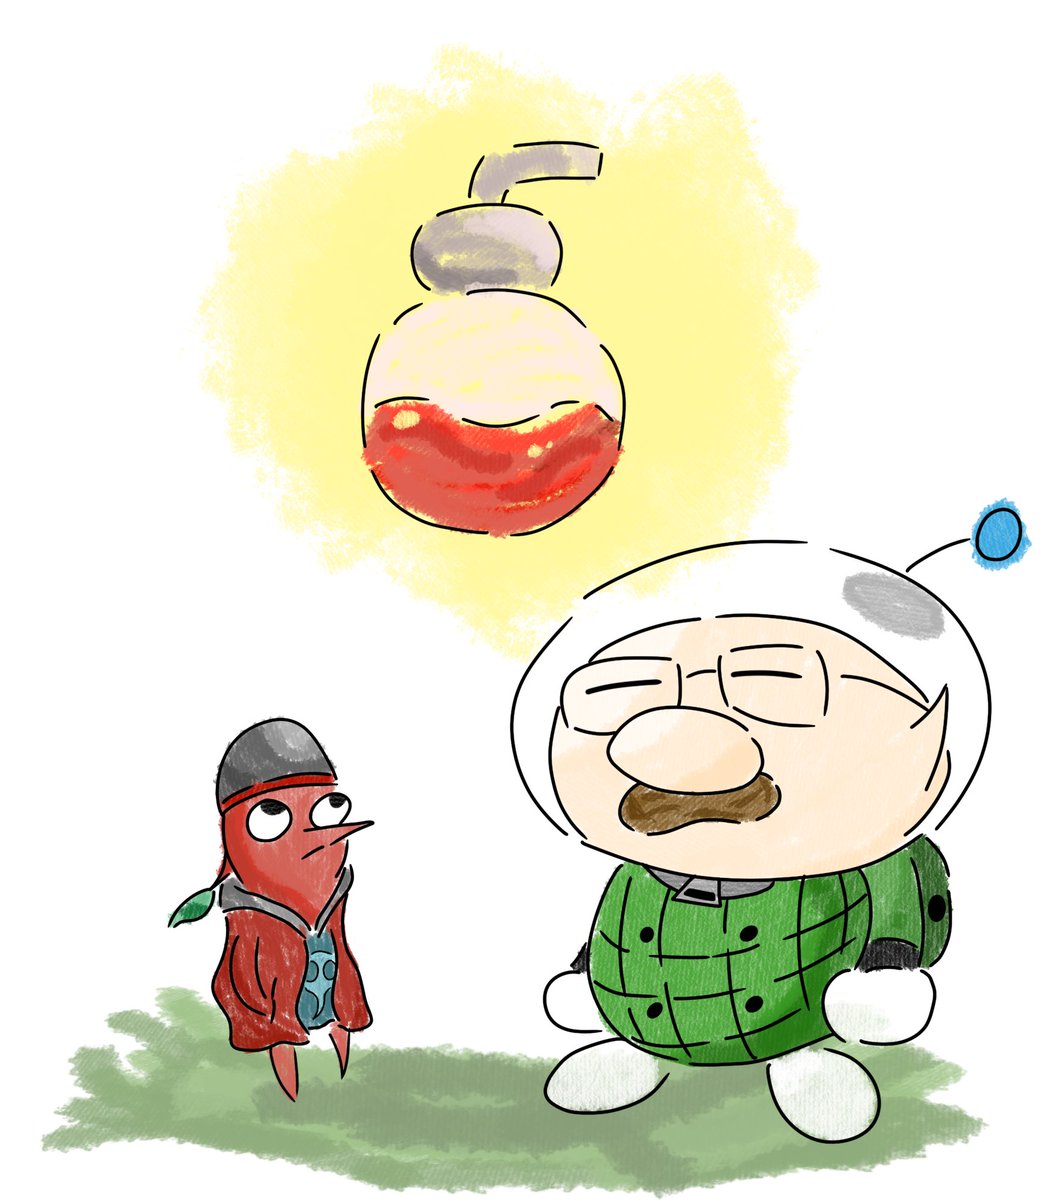 Jesse Pikmin and Captain Olimar

Tried this one in the style of the pikmin comics, lemme know what you think